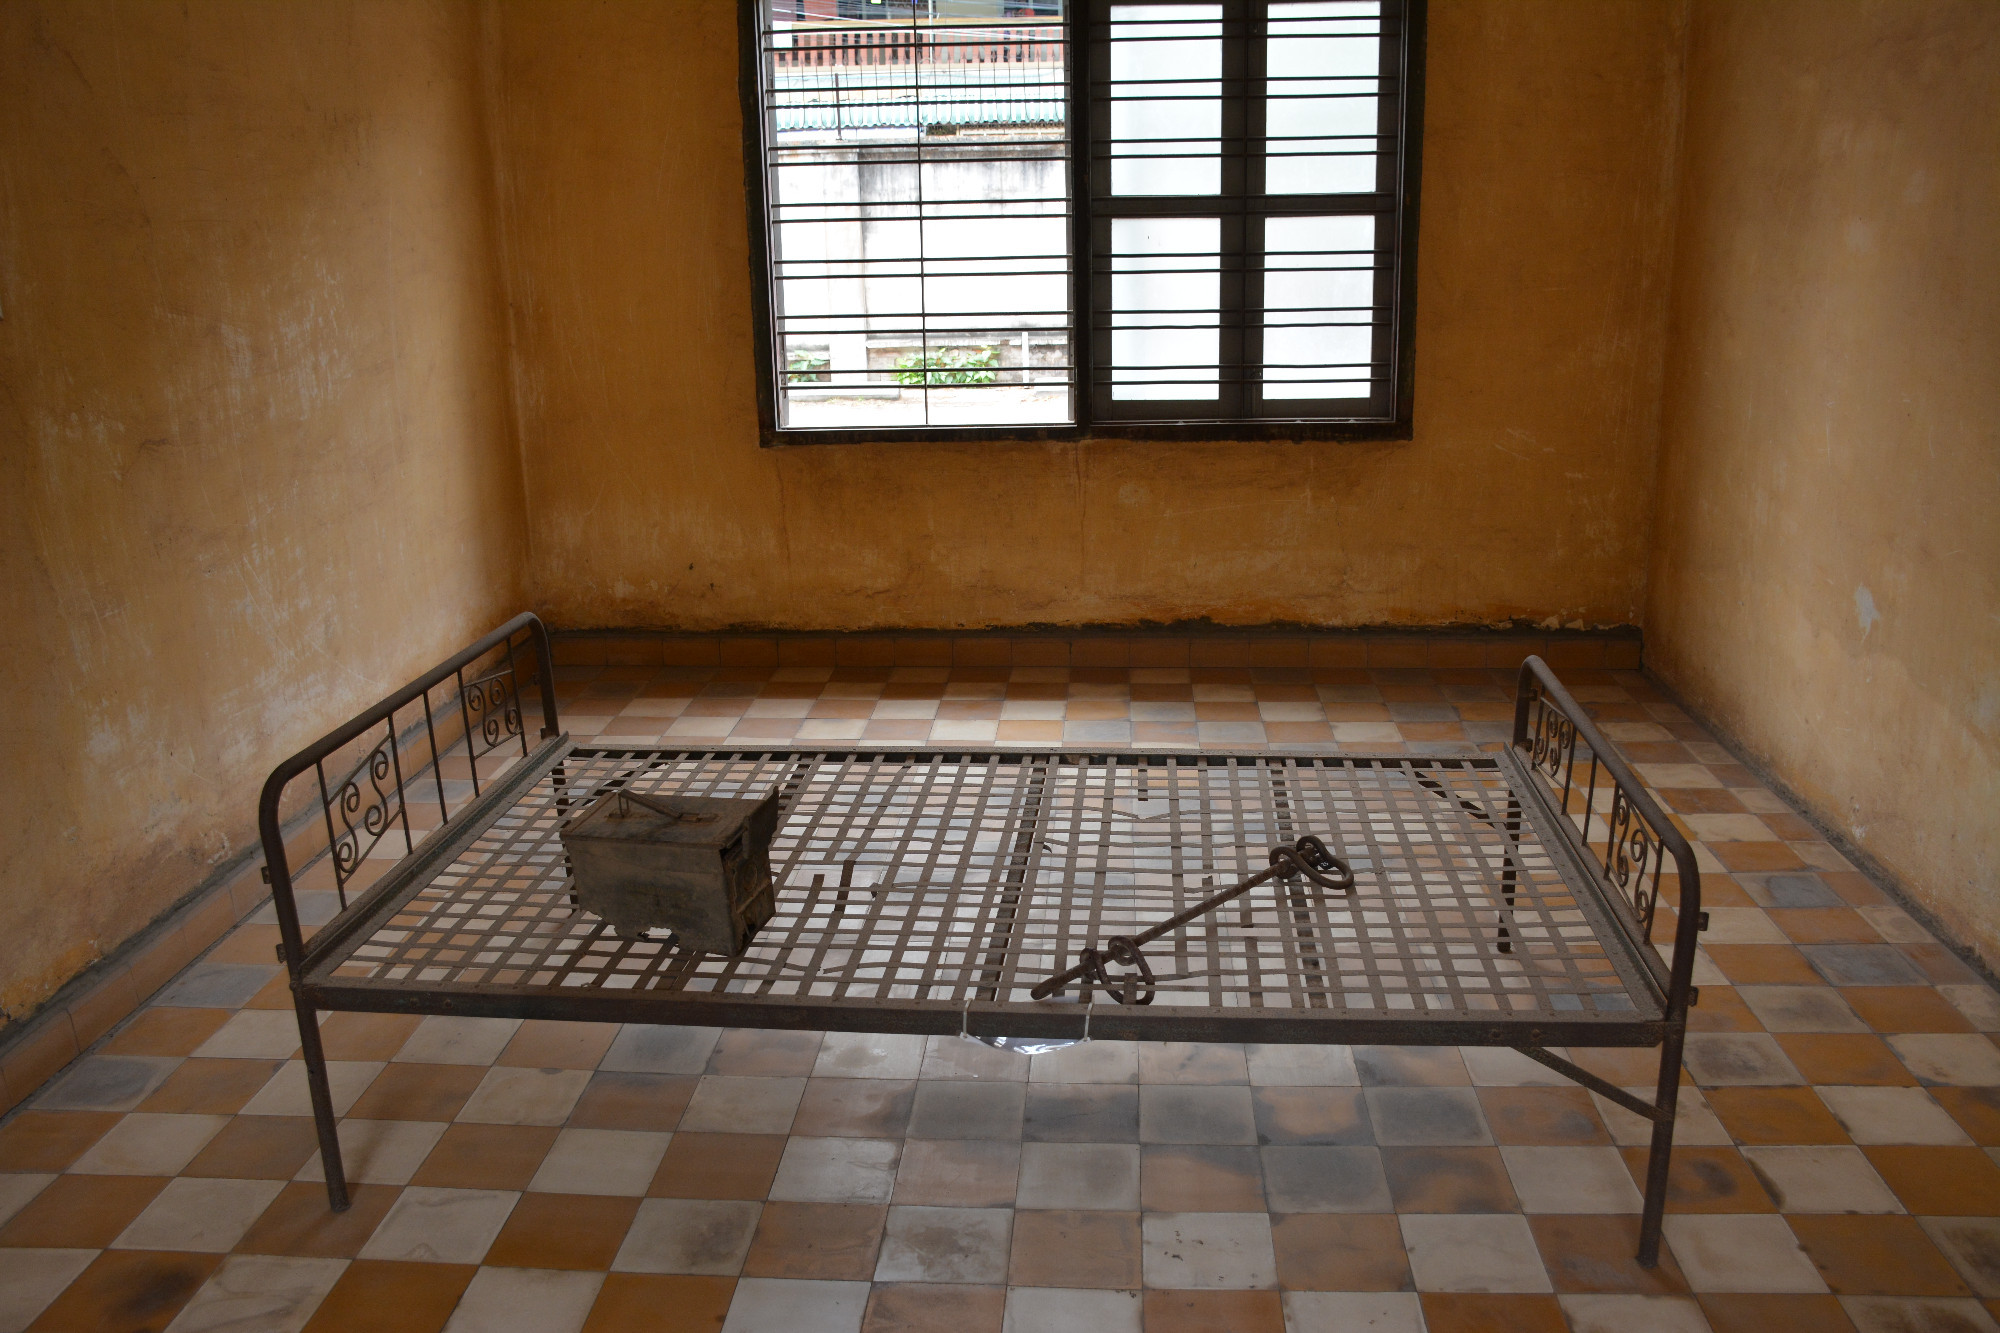 Cell prisoner chained to bed frame